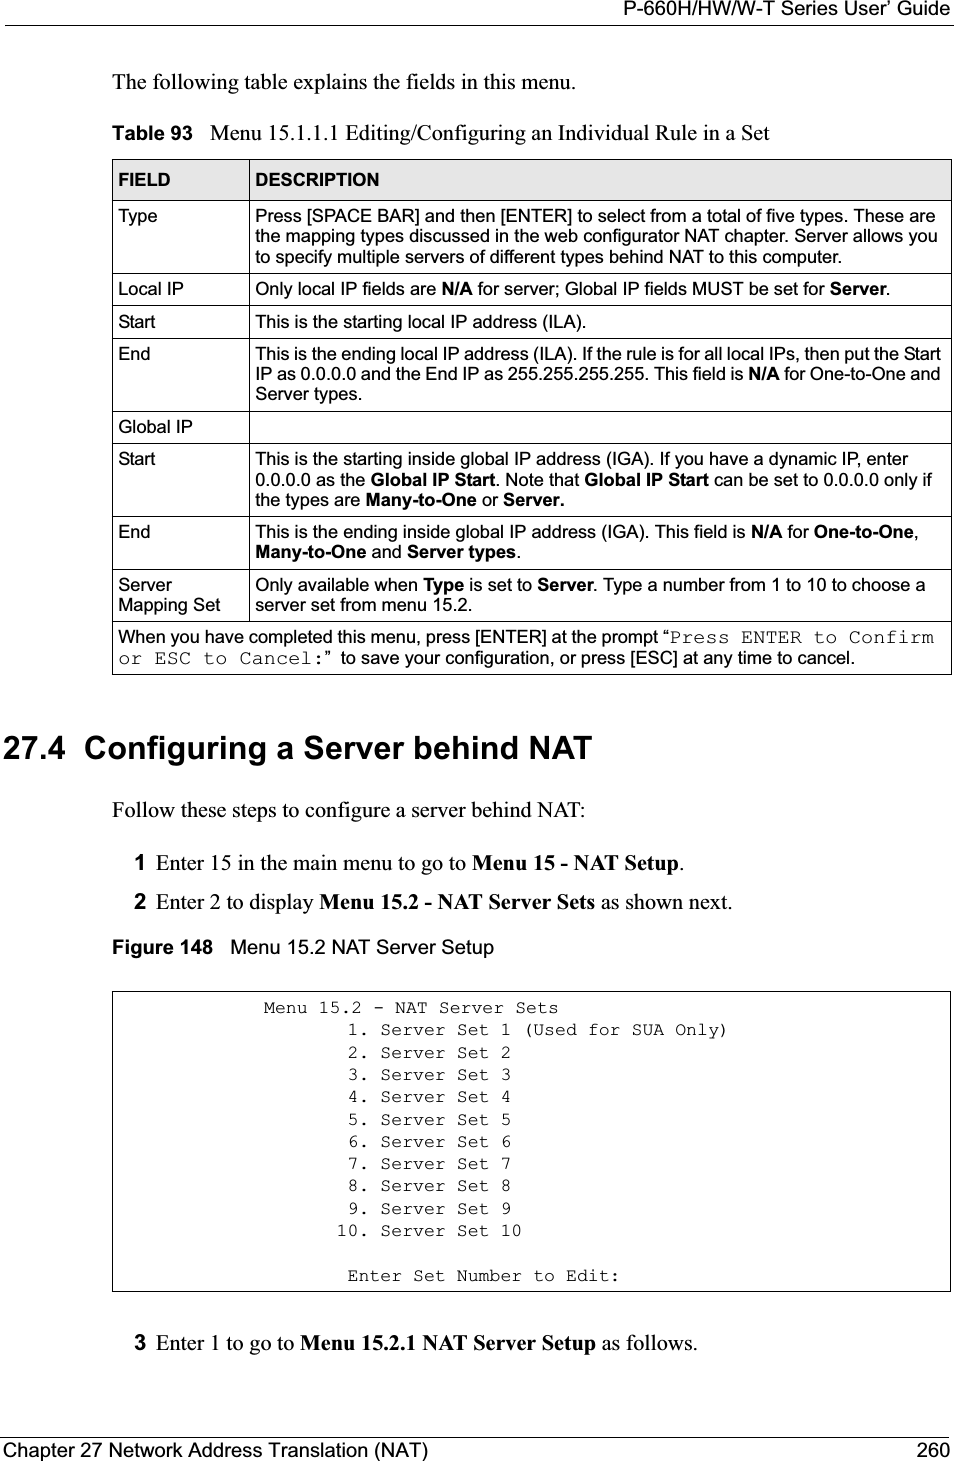 P-660H/HW/W-T Series User’ GuideChapter 27 Network Address Translation (NAT) 260The following table explains the fields in this menu.27.4  Configuring a Server behind NATFollow these steps to configure a server behind NAT:1Enter 15 in the main menu to go to Menu 15 - NAT Setup.2Enter 2 to display Menu 15.2 - NAT Server Sets as shown next.Figure 148   Menu 15.2 NAT Server Setup3Enter 1 to go to Menu 15.2.1 NAT Server Setup as follows.Table 93   Menu 15.1.1.1 Editing/Configuring an Individual Rule in a SetFIELD DESCRIPTIONType Press [SPACE BAR] and then [ENTER] to select from a total of five types. These are the mapping types discussed in the web configurator NAT chapter. Server allows you to specify multiple servers of different types behind NAT to this computer.Local IP Only local IP fields are N/A for server; Global IP fields MUST be set for Server.Start This is the starting local IP address (ILA).End This is the ending local IP address (ILA). If the rule is for all local IPs, then put the Start IP as 0.0.0.0 and the End IP as 255.255.255.255. This field is N/A for One-to-One and Server types.Global IPStart This is the starting inside global IP address (IGA). If you have a dynamic IP, enter 0.0.0.0 as the Global IP Start. Note that Global IP Start can be set to 0.0.0.0 only if the types are Many-to-One or Server.End This is the ending inside global IP address (IGA). This field is N/A for One-to-One,Many-to-One and Server types.ServerMapping SetOnly available when Type is set to Server. Type a number from 1 to 10 to choose a server set from menu 15.2.When you have completed this menu, press [ENTER] at the prompt “Press ENTER to Confirm or ESC to Cancel:”  to save your configuration, or press [ESC] at any time to cancel.Menu 15.2 - NAT Server Sets                     1. Server Set 1 (Used for SUA Only)                     2. Server Set 2                     3. Server Set 3                     4. Server Set 4                     5. Server Set 5                     6. Server Set 6                     7. Server Set 7                     8. Server Set 8                     9. Server Set 9                    10. Server Set 10                     Enter Set Number to Edit: